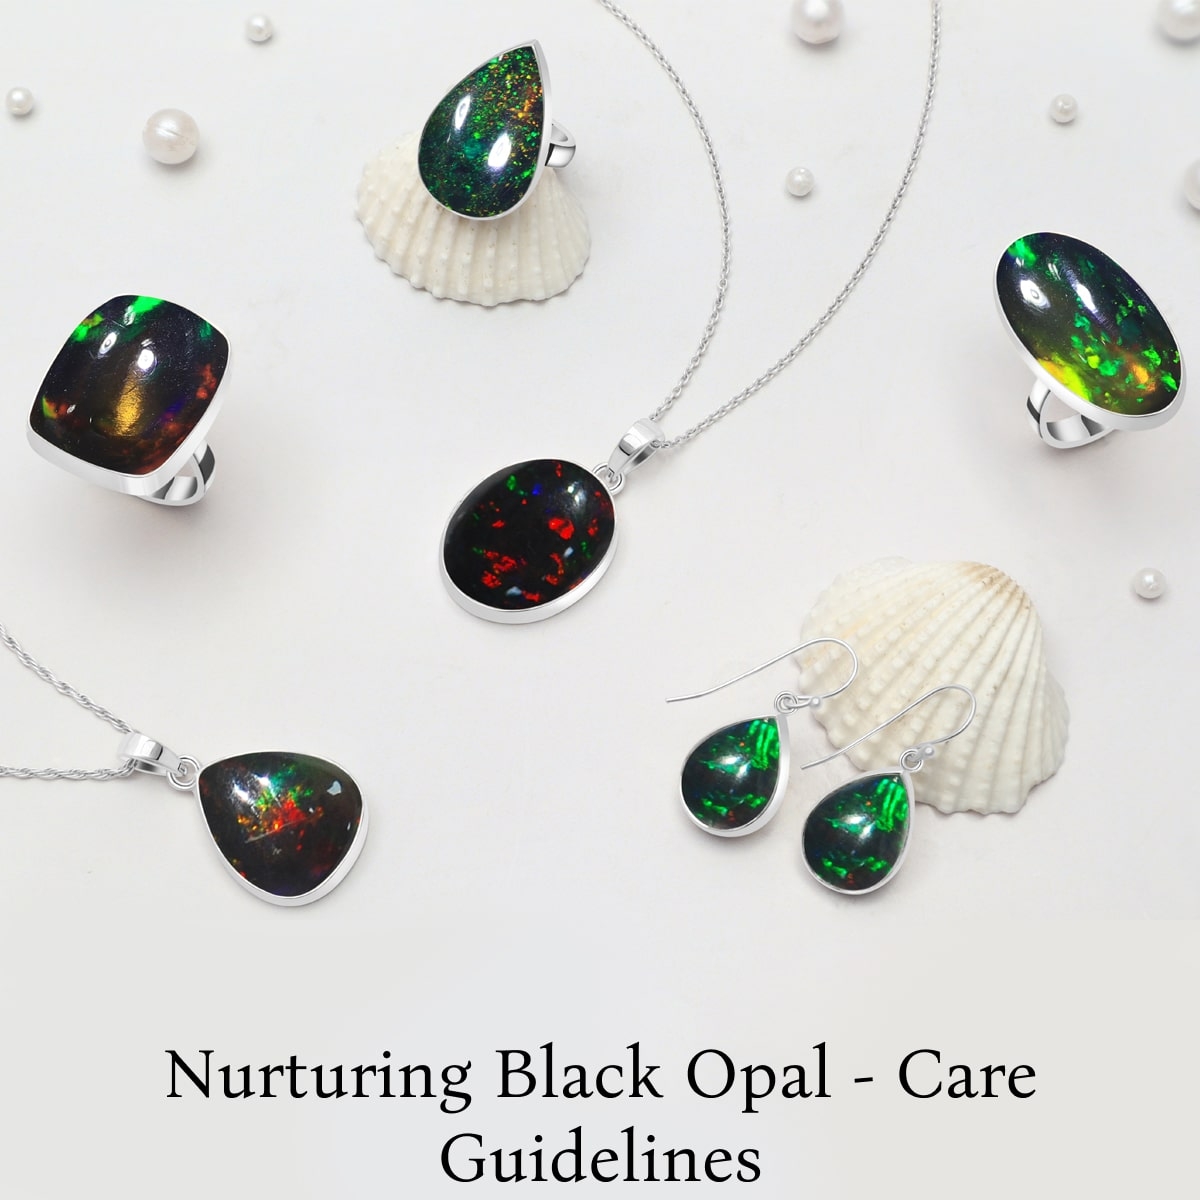 Caring for Black Opal